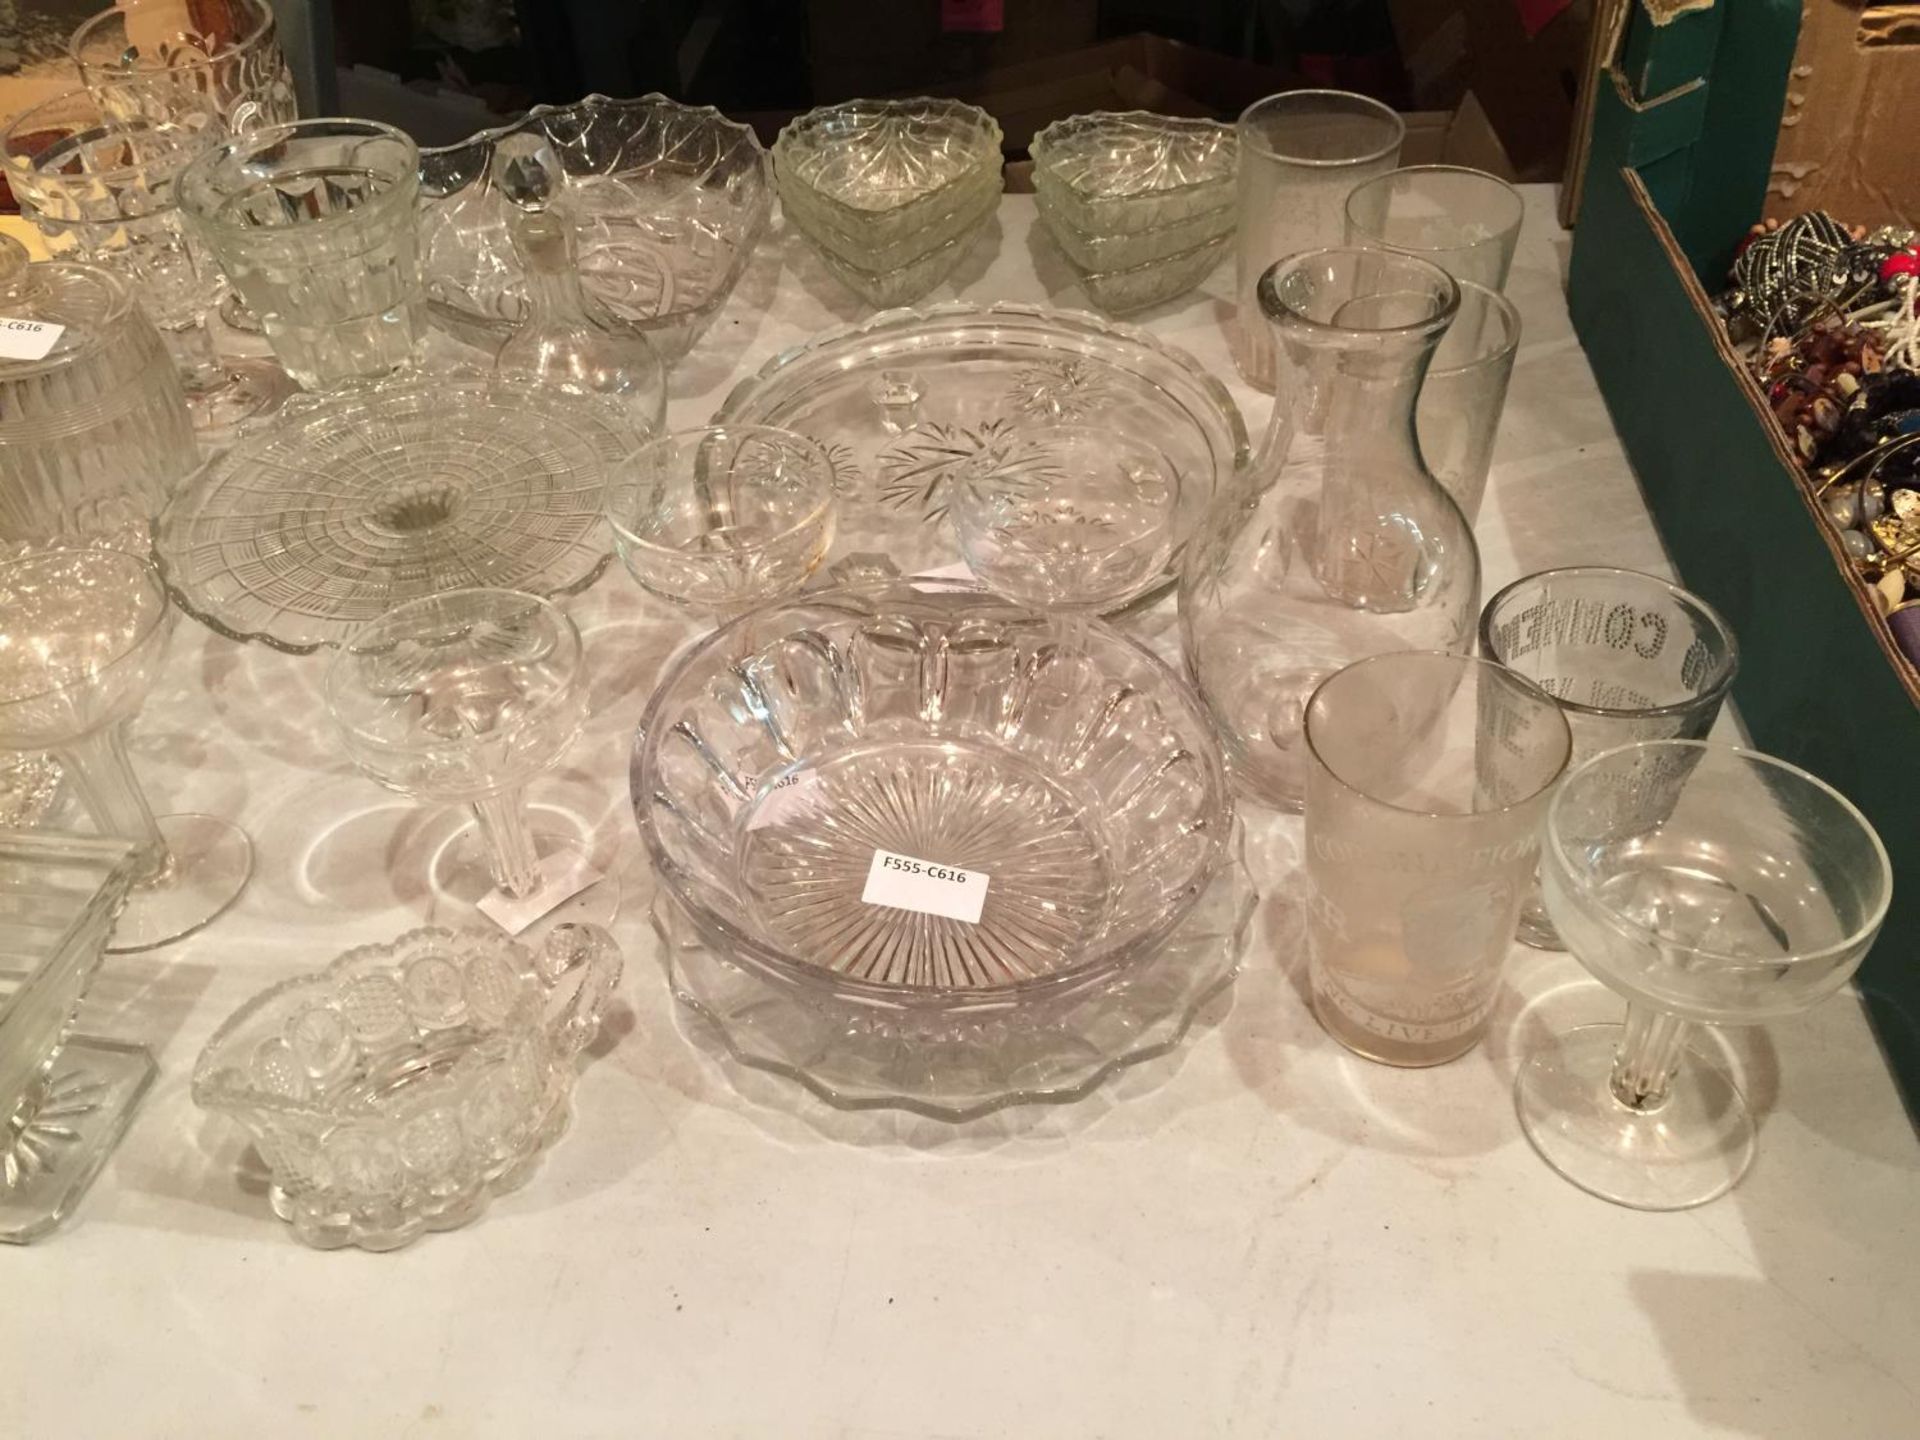 A LARGE AMOUNT OF CLEAR GLASSWARE TO INCLUDE HEART SHAPED DISHES, COMMEMORATIVE TUMBLERS, CAKE - Image 2 of 4